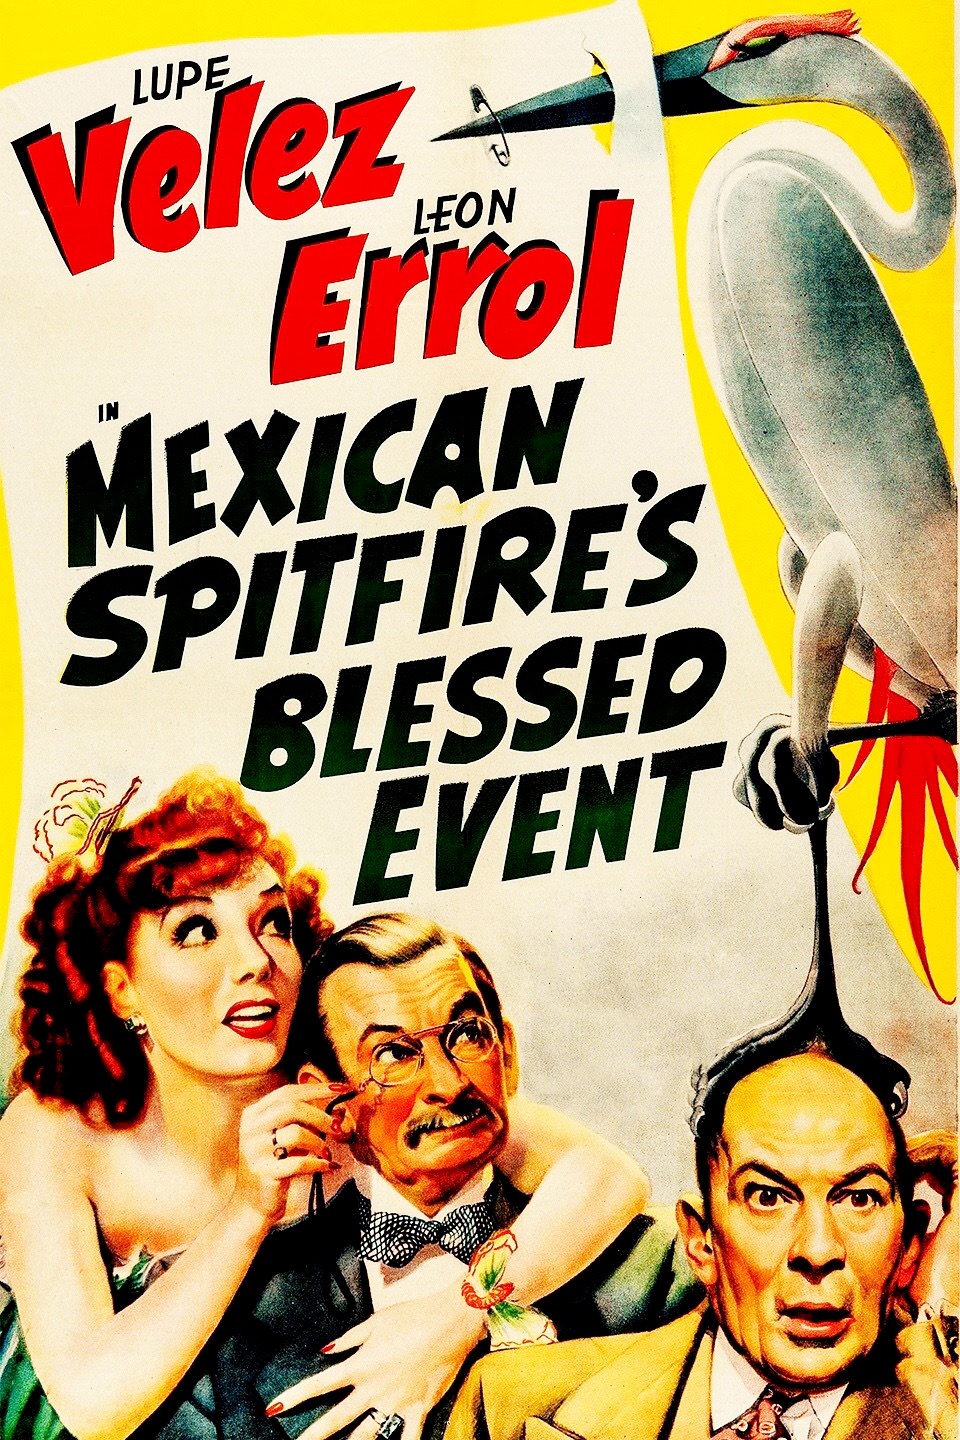 Mexican Spitfire's Blessed Event (1943) Screenshot 1 